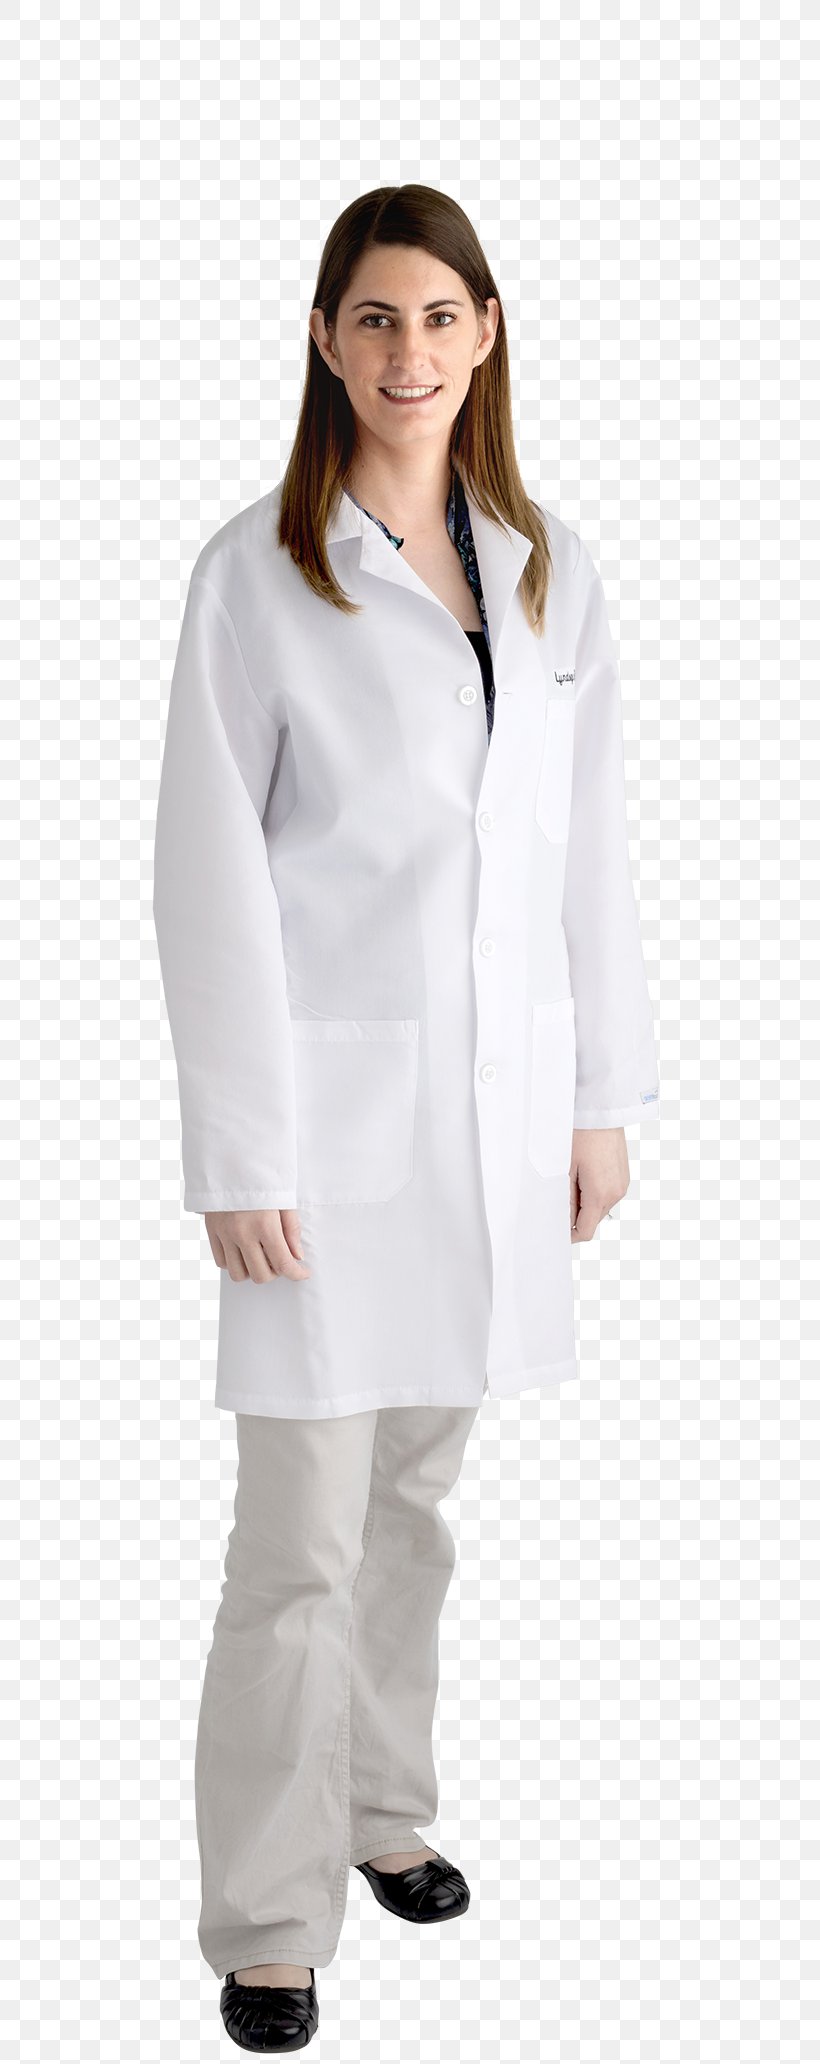 Lab Coats Physician Stethoscope Sleeve Costume, PNG, 700x2064px, Lab Coats, Clothing, Costume, Health, Health Care Download Free